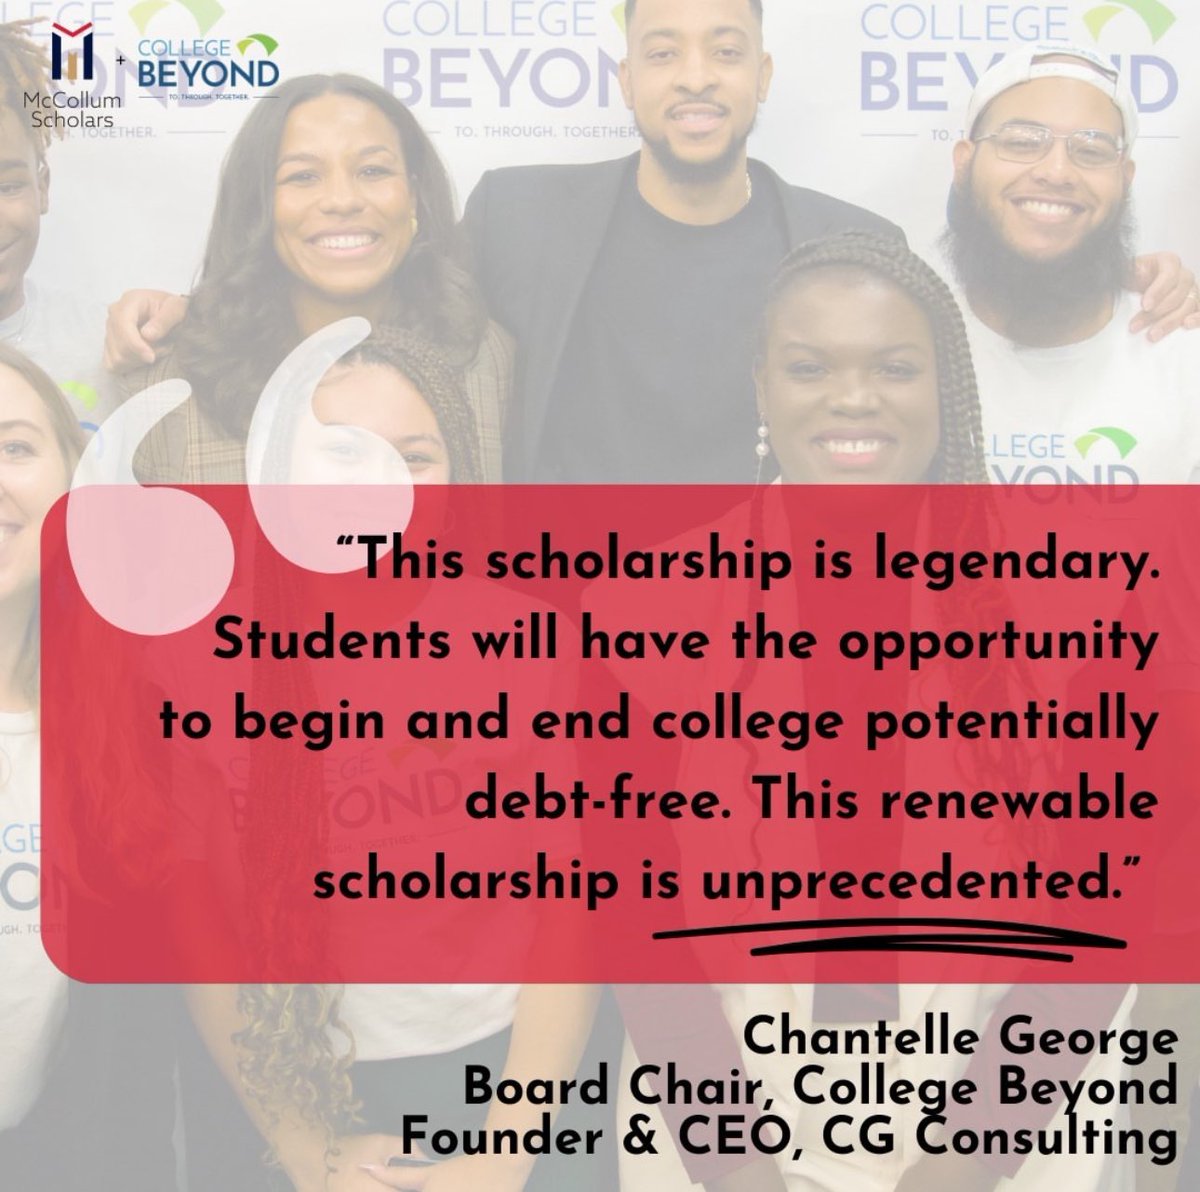 In partnership with New Orleans @PelicansNBA basketball player @CJMcCollum, we look forward to supporting students in our city in this incredible way. #McCollumScholarsProgram #ToThroughTogether